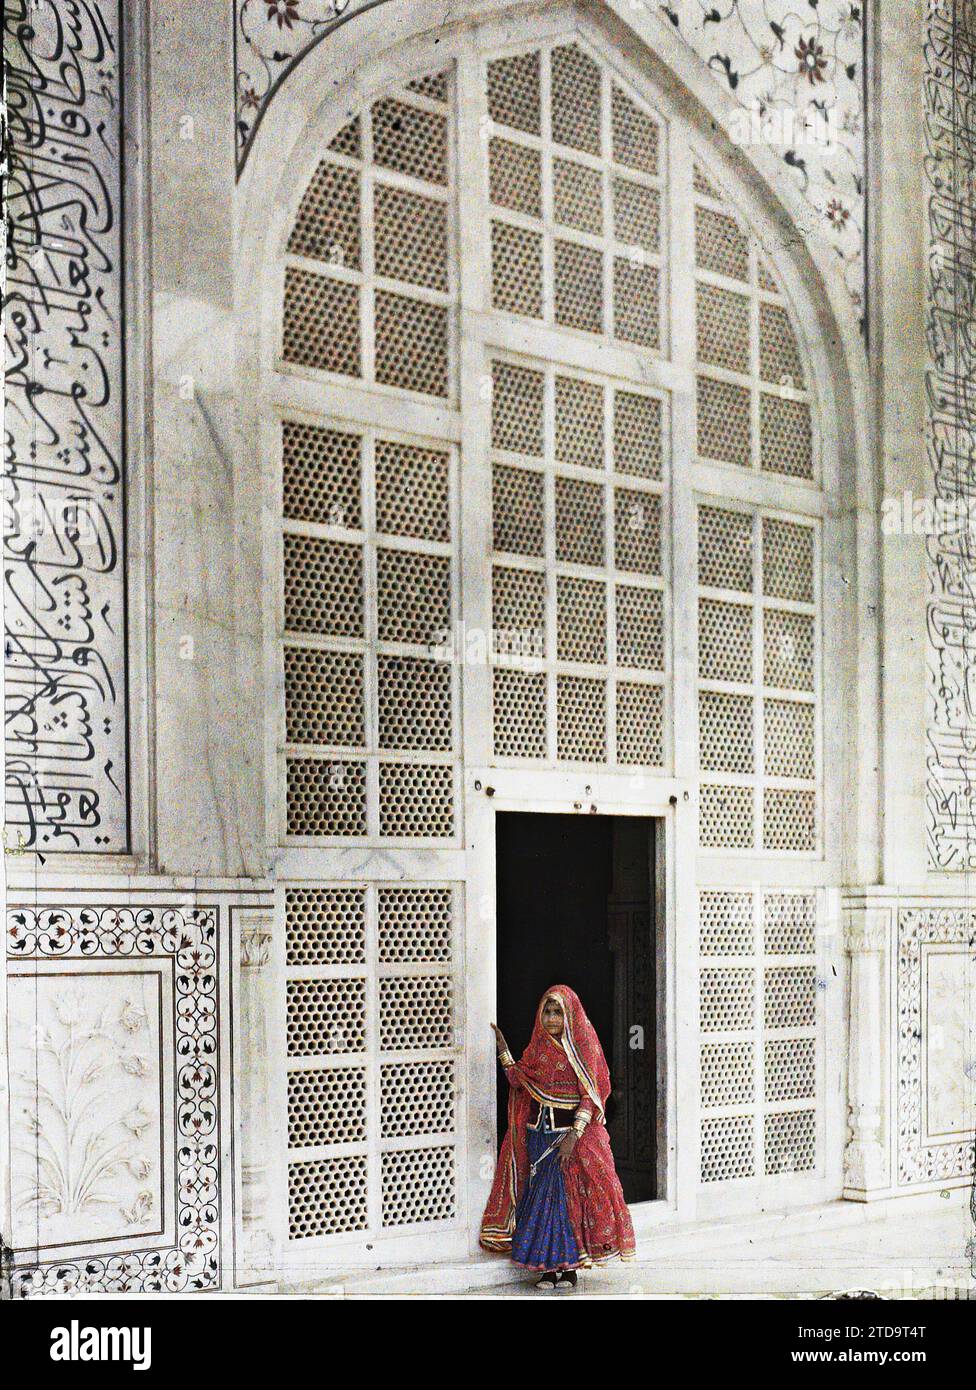 Agra, India Woman wearing full skirt ( ghagra ) and large shawl ( odhni ) drawn over her head, at the gate of the Taj Mahal, Personality, Clothing, Habitat, Architecture, Religion, HD, Human beings, Political personality, Costume, Tomb, Funerary architecture, Islam, exists in high definition, Child, Emperor, Door, Religious architecture, India, Agra, Entrance door to the Taj-Mahal, Agra, Taj Mahal, 25/12/1913 - 27/12/1913, Passet, Stéphane, photographer, 1913-1914 - Inde, Pakistan - Stéphane Passet - (16 December-29 January), Autochrome, photo, Glass, Autochrome, photo, Vertical, Size 9 x 12 c Stock Photo